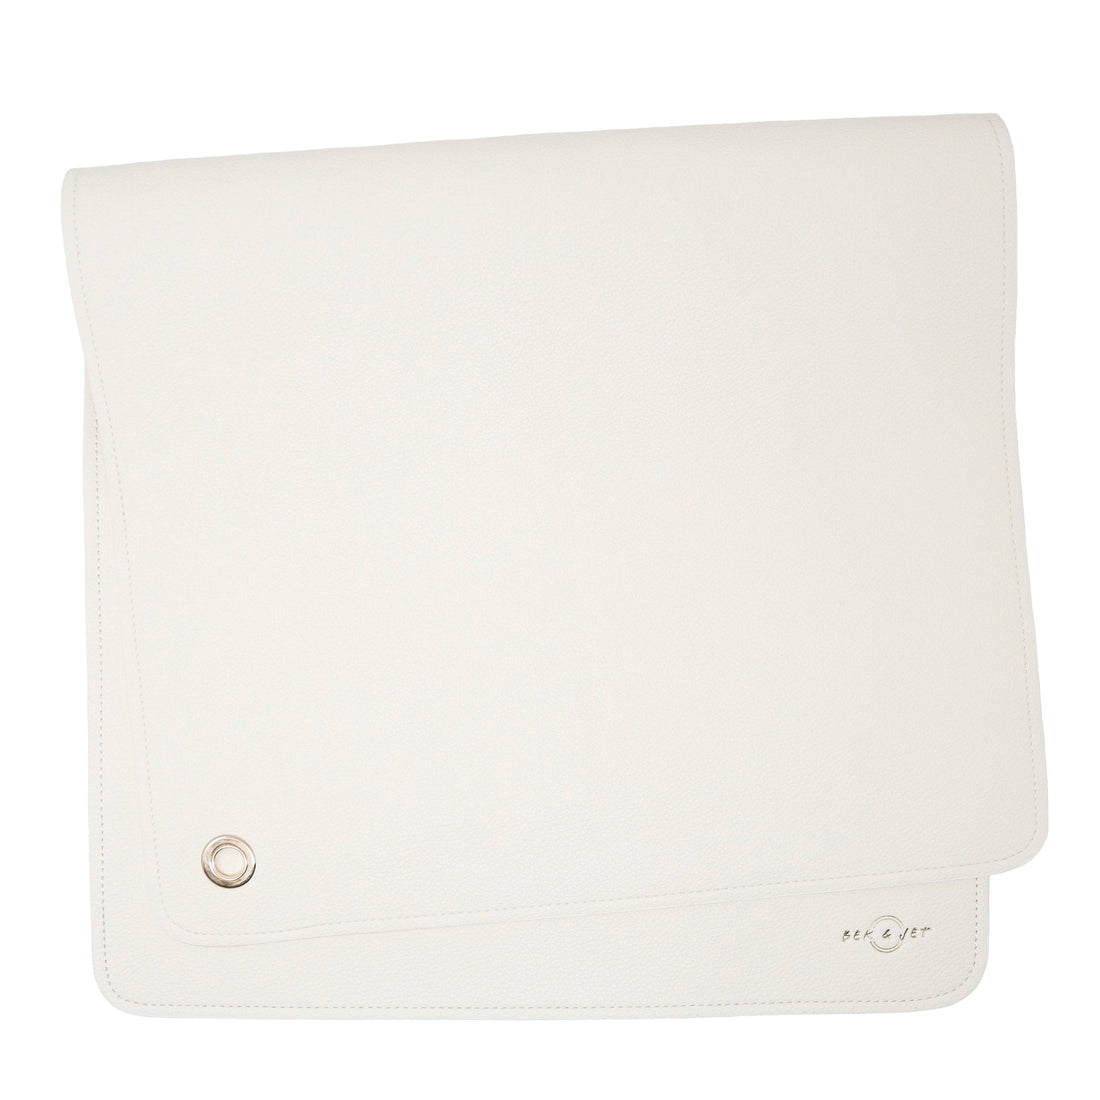 The Perfect Addition to Your Baby Essentials: Introducing the Ivory Vegan Leather Changing Mat